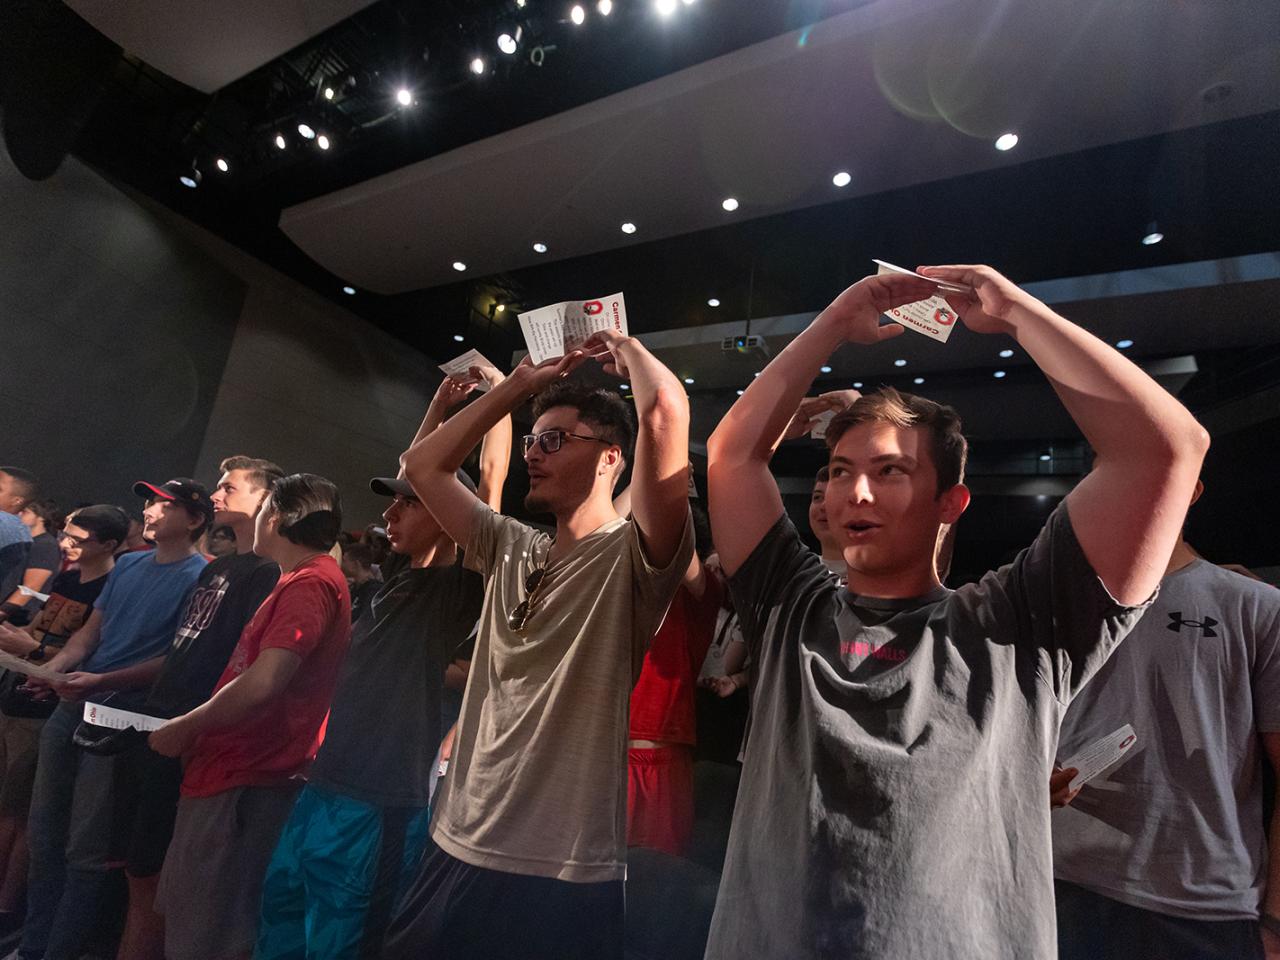 Students in the crowd form the letter O with their arms above their head.